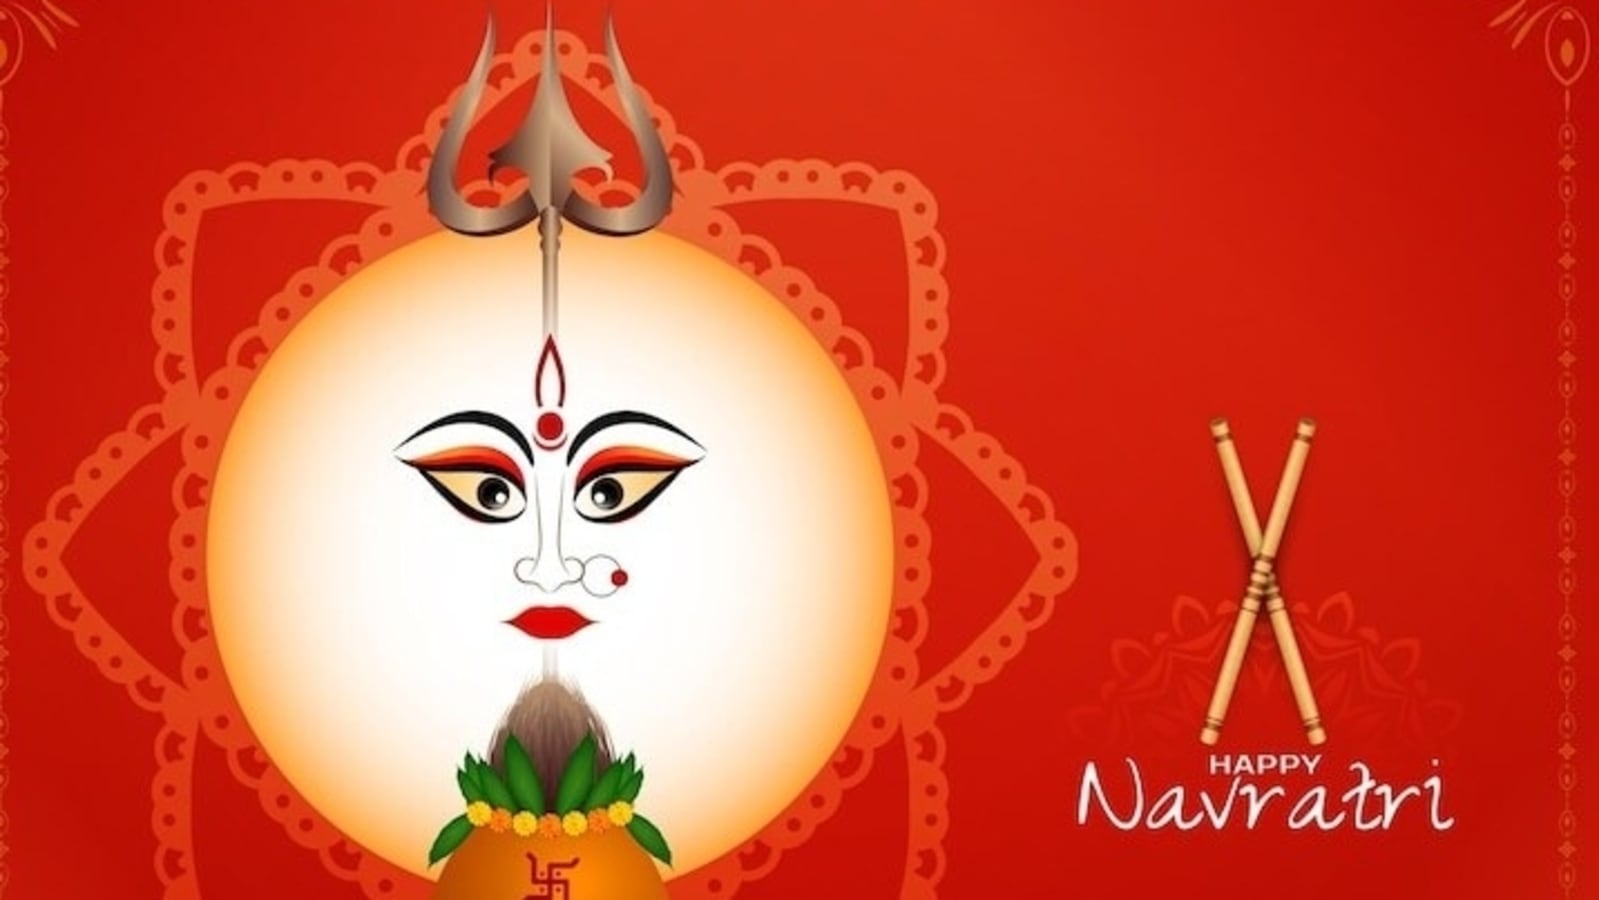 Navratri fasting tips How to plan healthy meals to stay energised